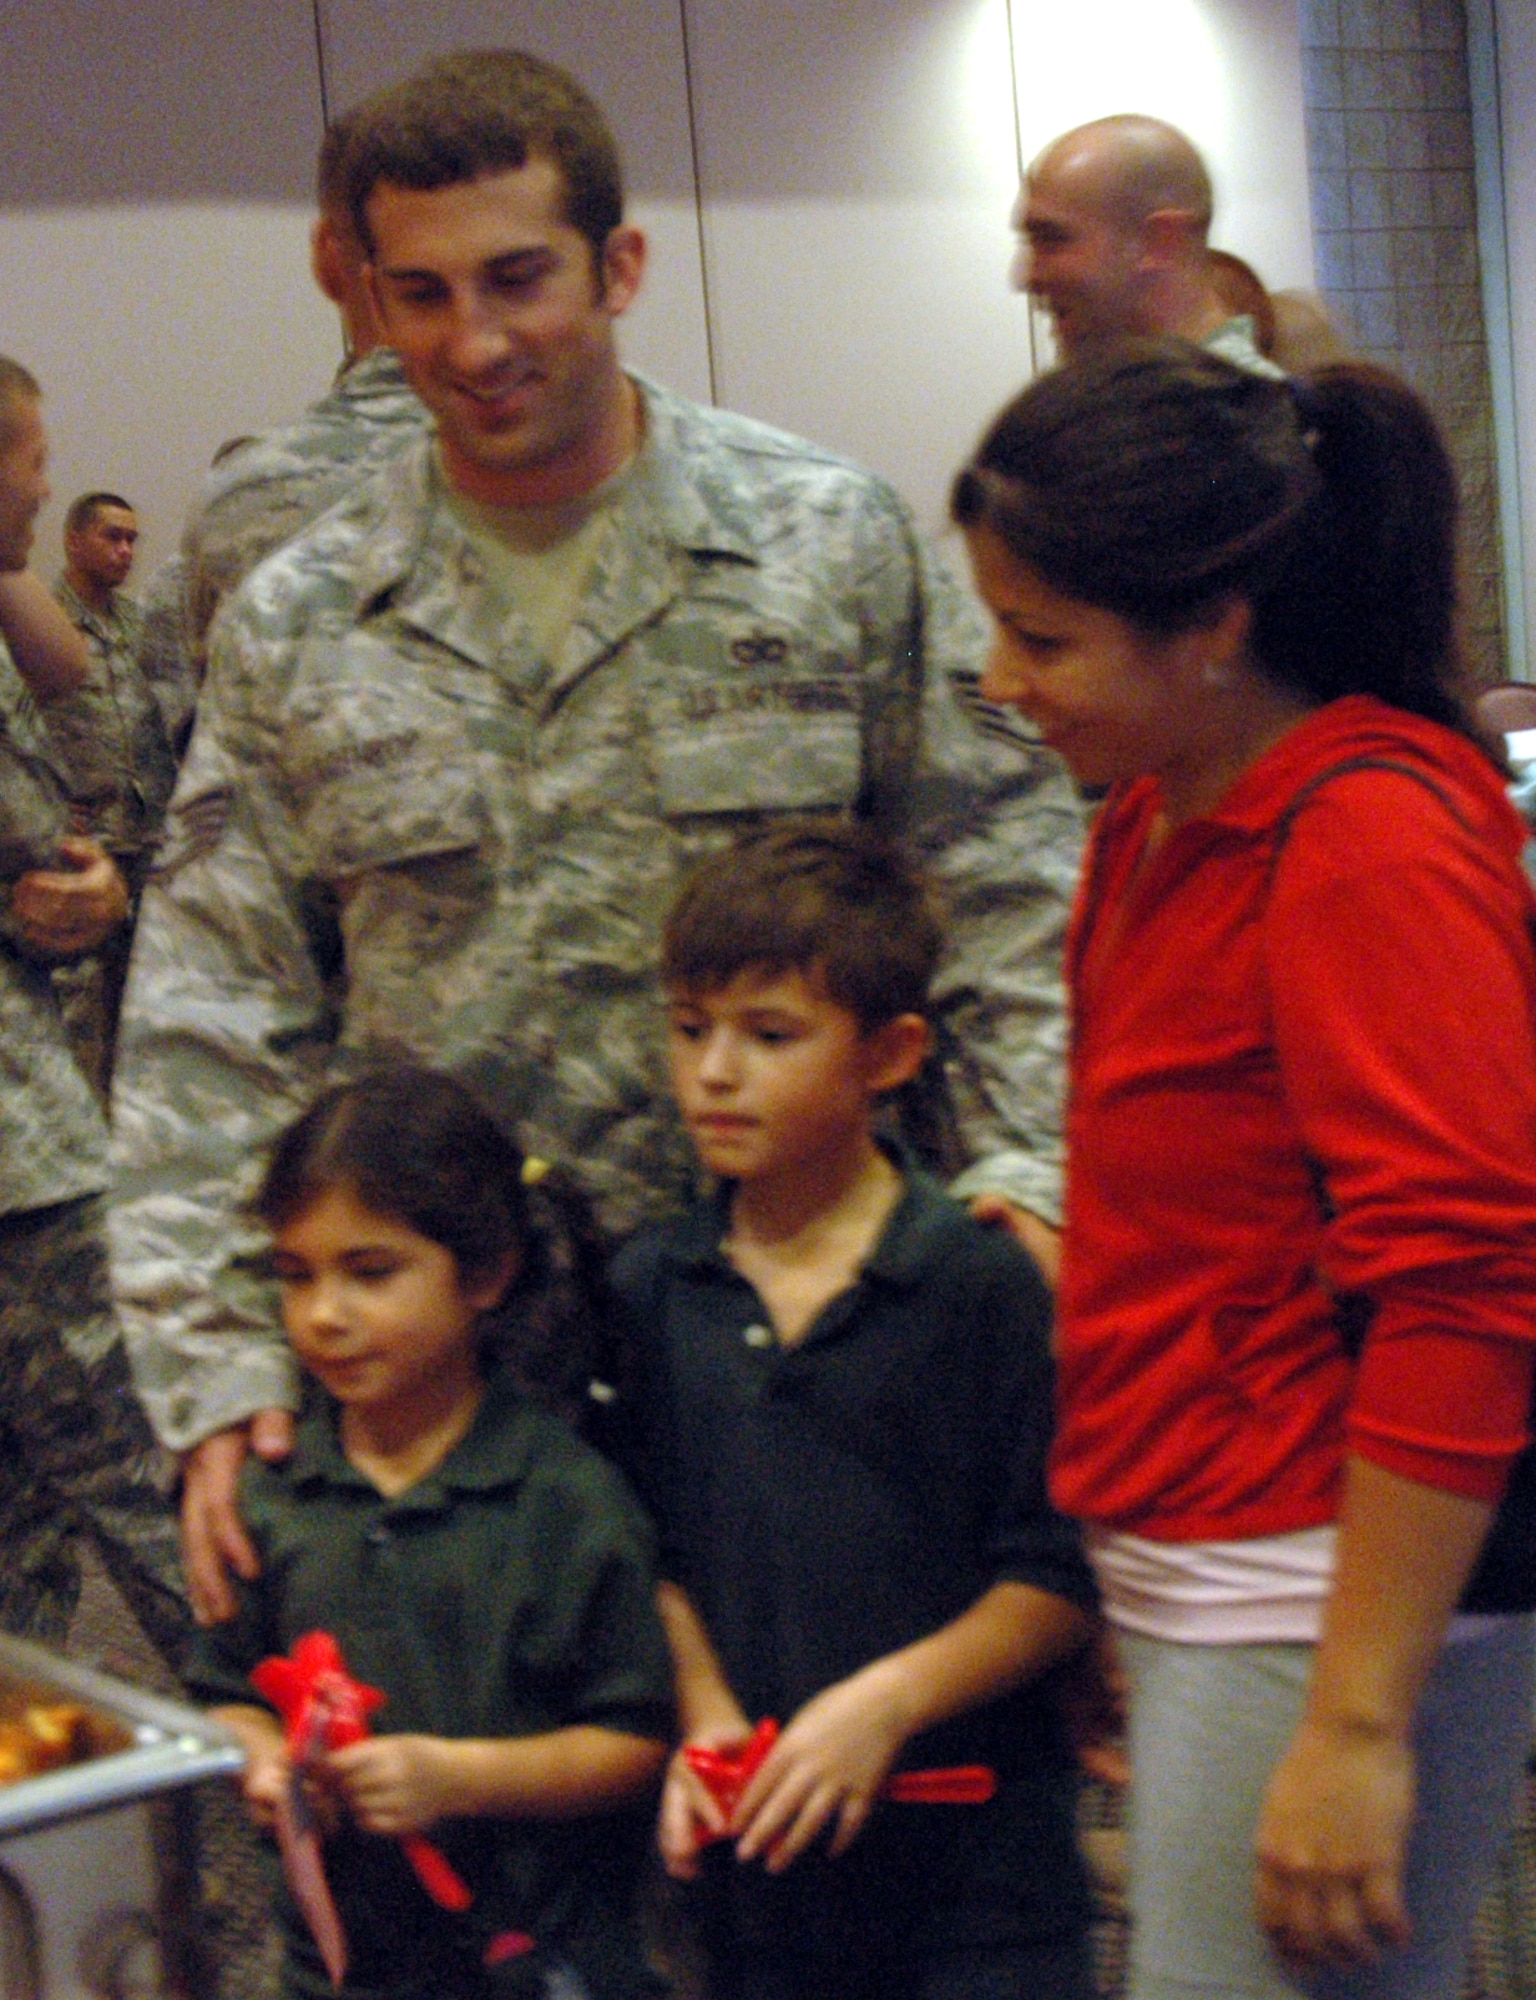 Staff Sgt. Arthur Lothrop, CATM Instructor, 325th Security Forces Squadron and his family attend the Warrior Celebration Sept. 8 from 4 to 5 p.m. at the Heritage Club. (U.S. Air Froce photo by Airman 1st Class Veronica McMahon)